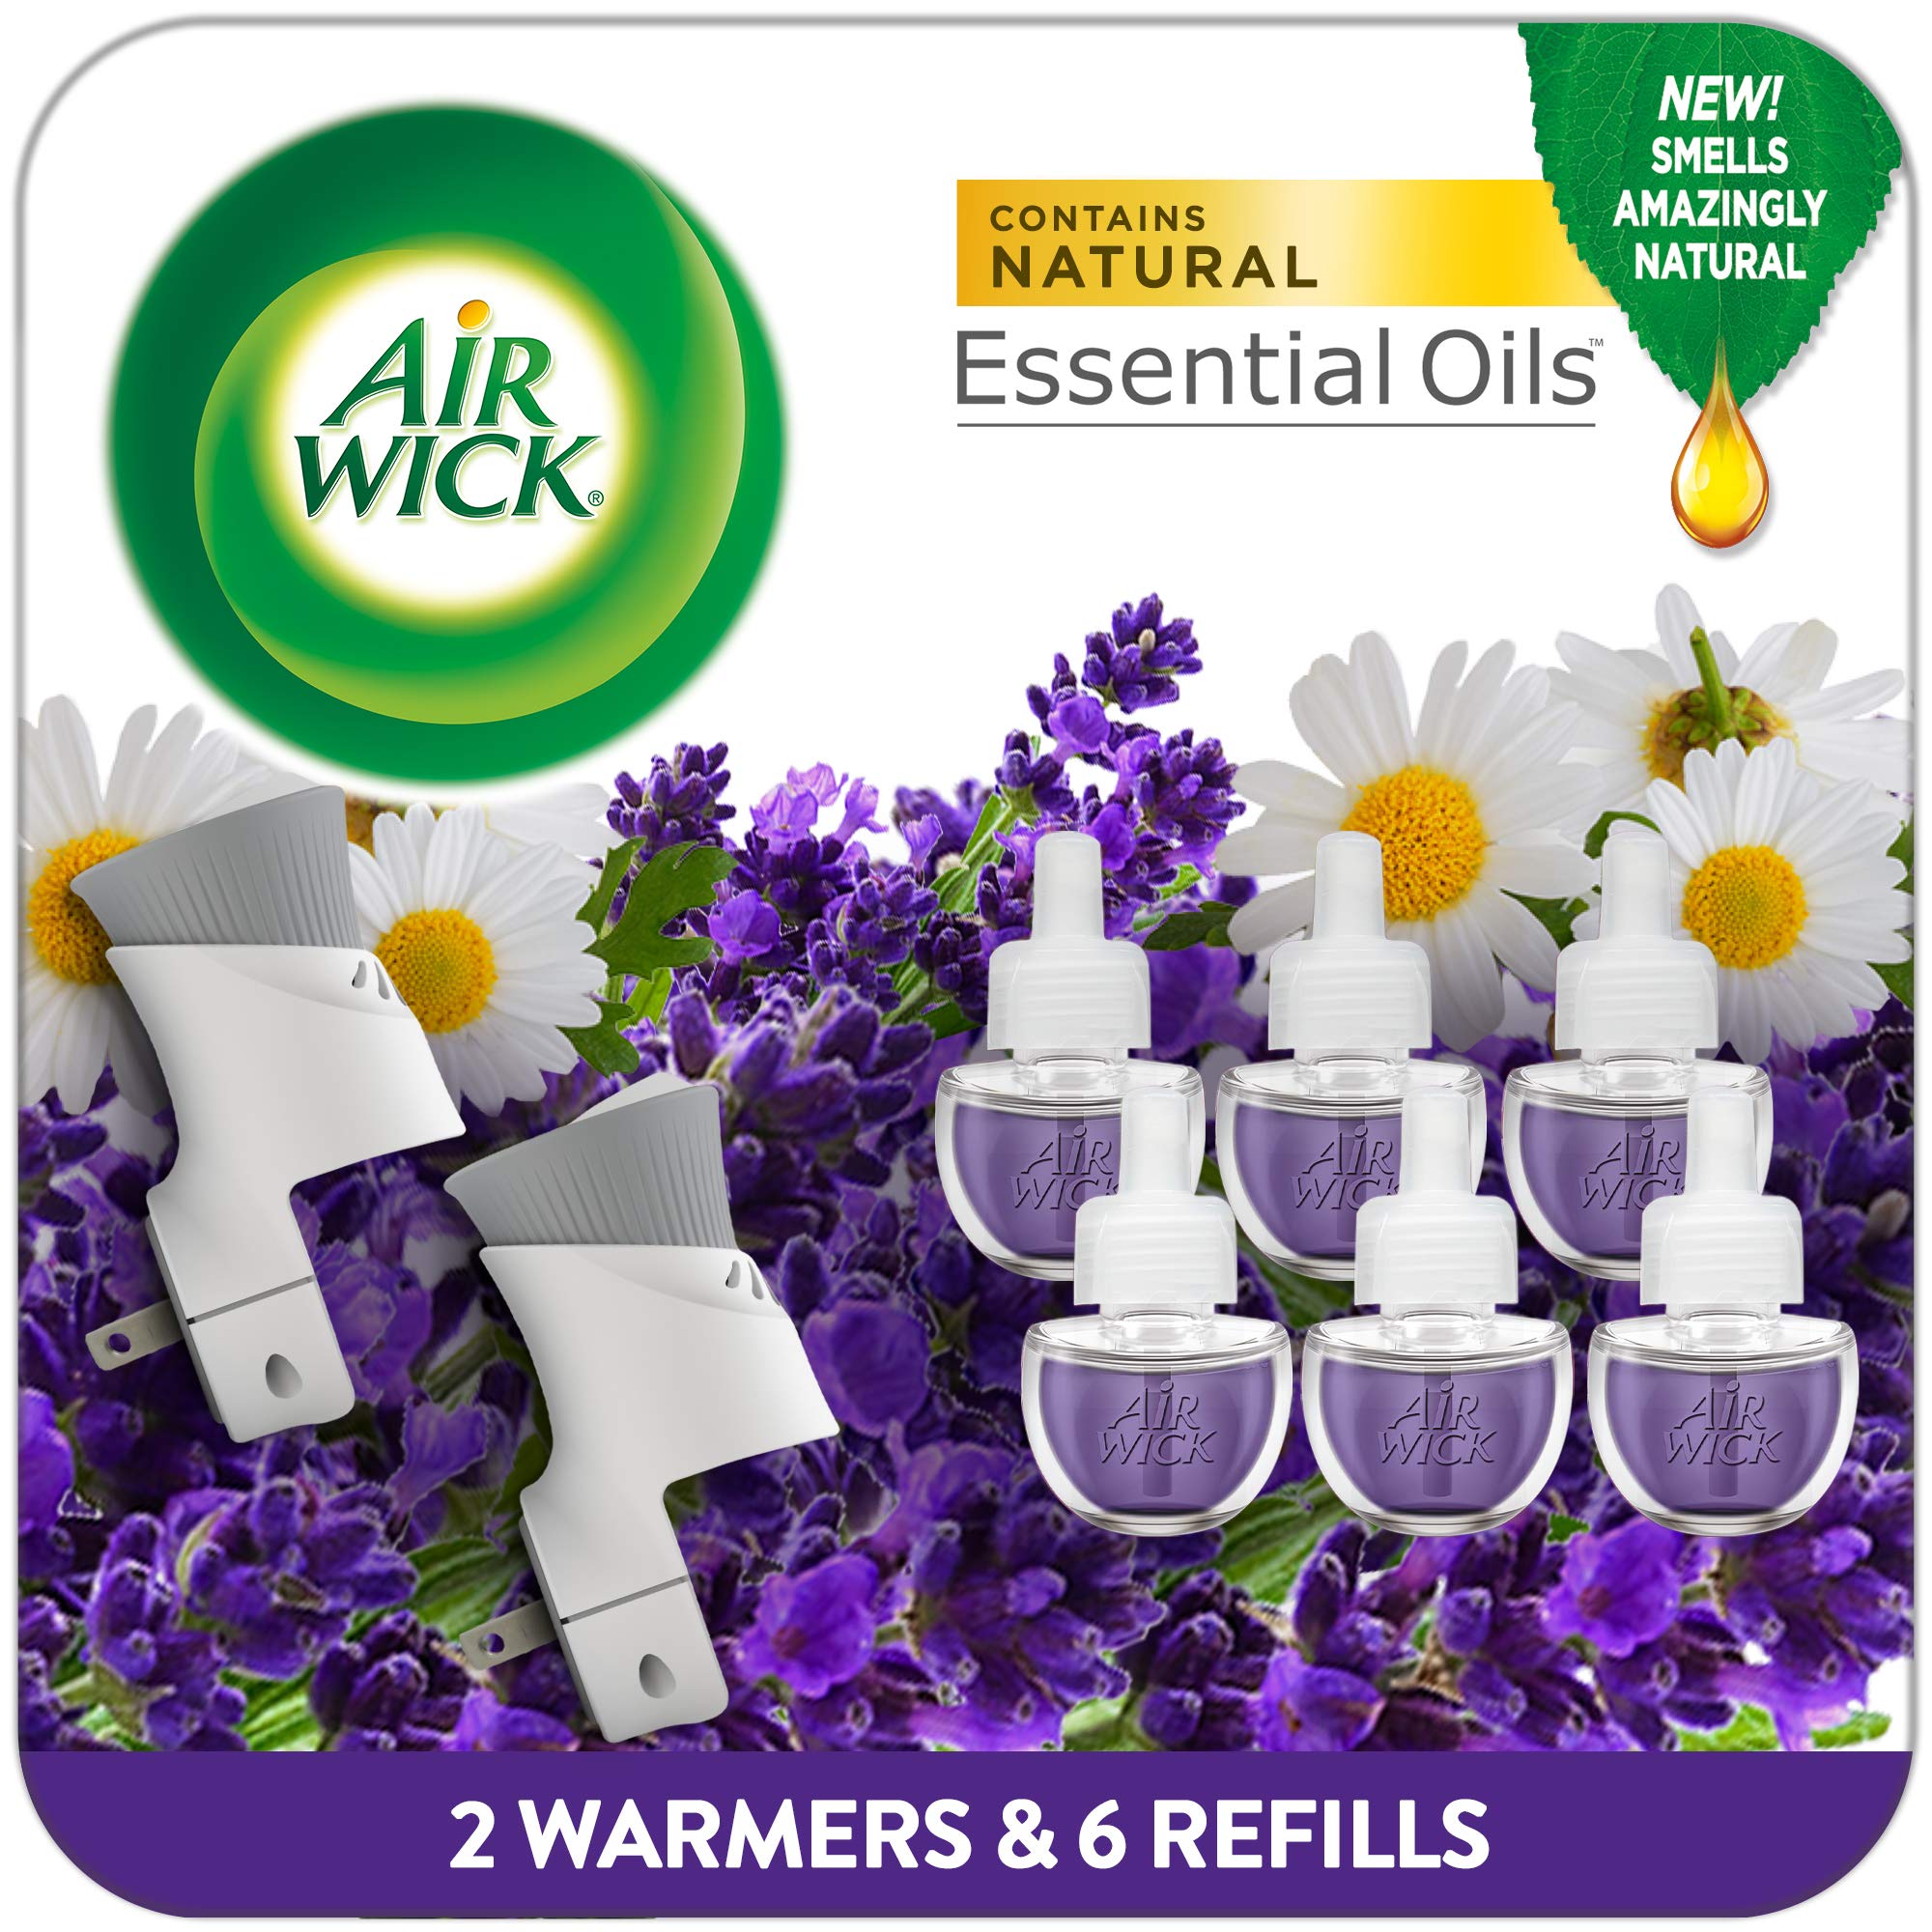 Air Wick plug in Scented Oil Starter Kit, 2 Warmers + 6 Refills, Lavender & Chamomile, Eco friendly, Essential Oils, Air Freshener